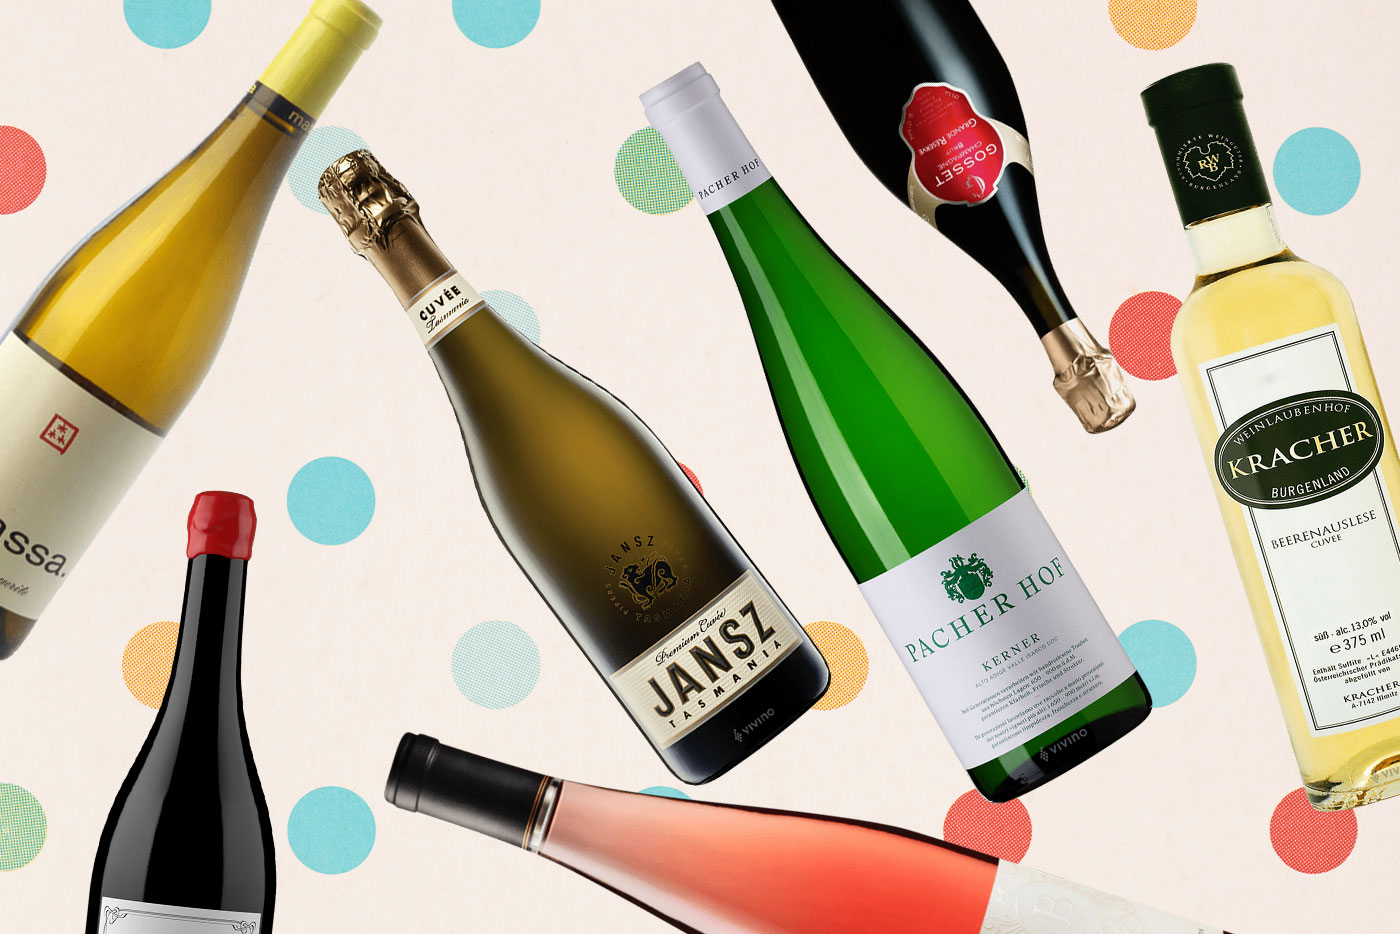 5 sparkling wines from around the world to try, including a refreshing $15  cava